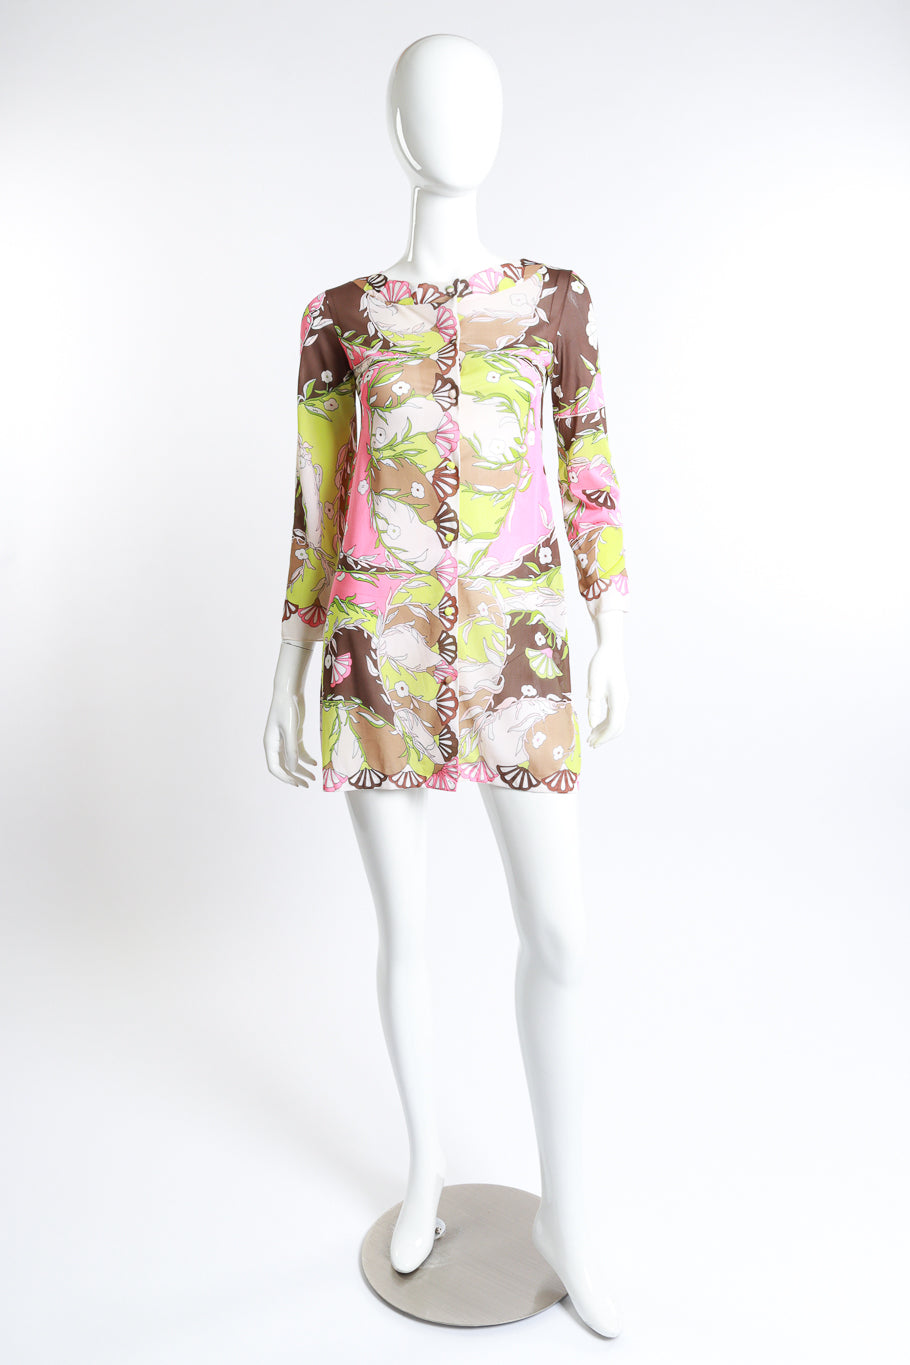 Vintage Emilio Pucci for Formfit Rogers floral fan lime and pink mesh jacket mini dress front view as worn on the mannequin @ Recess LA